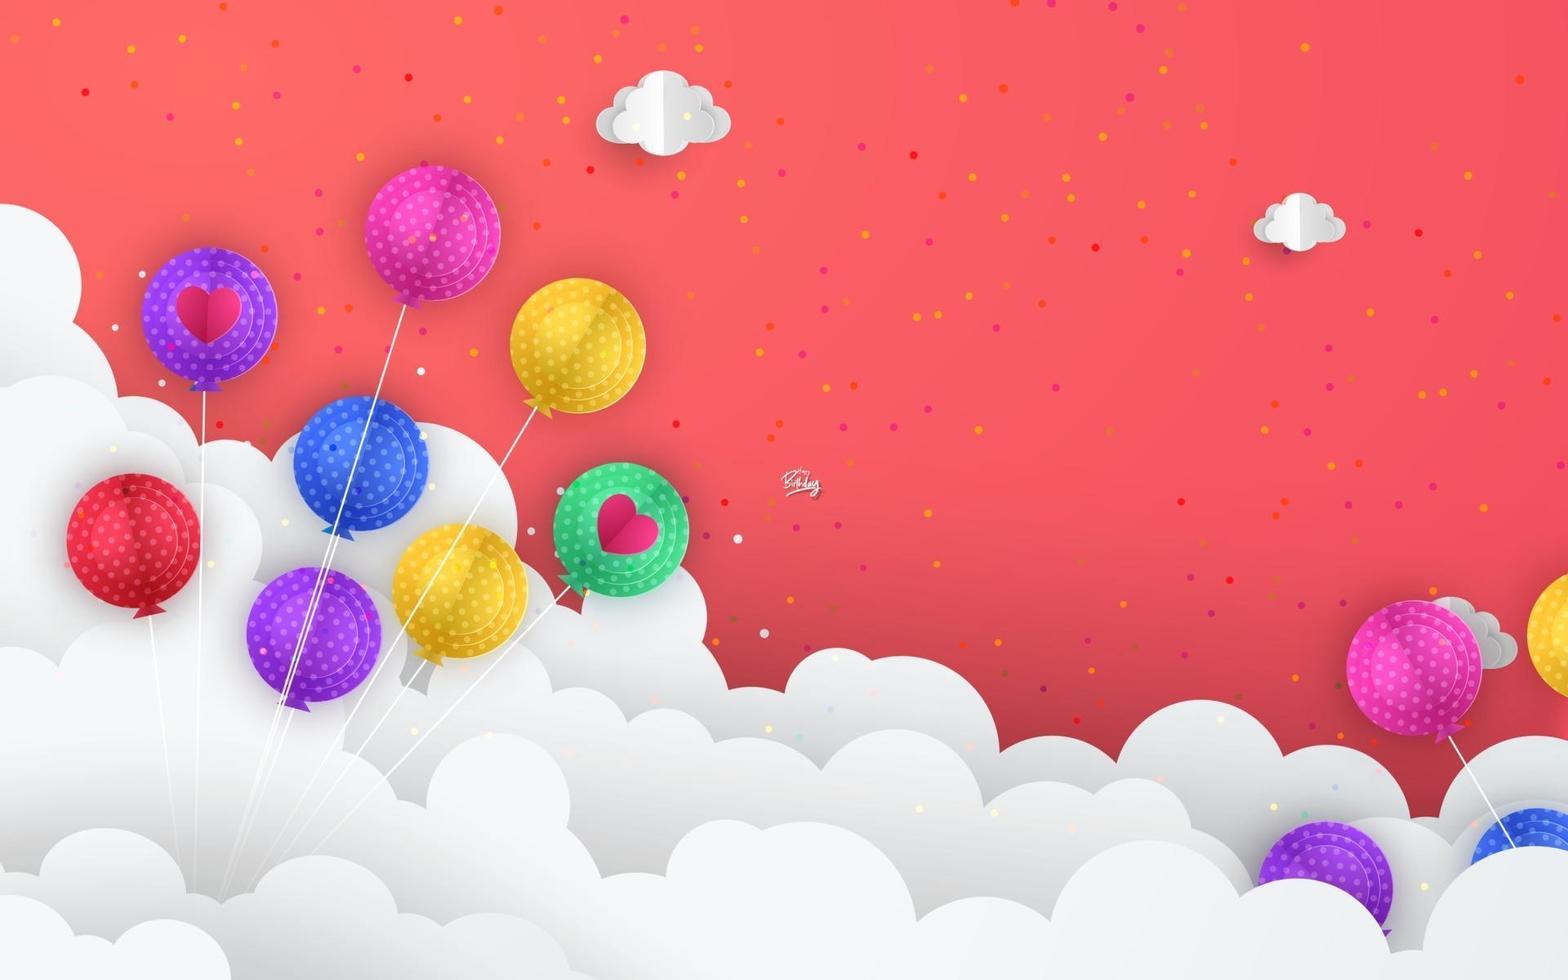 Paper art of balloons in clouds, Happy birthday celebration art and illustration. vector